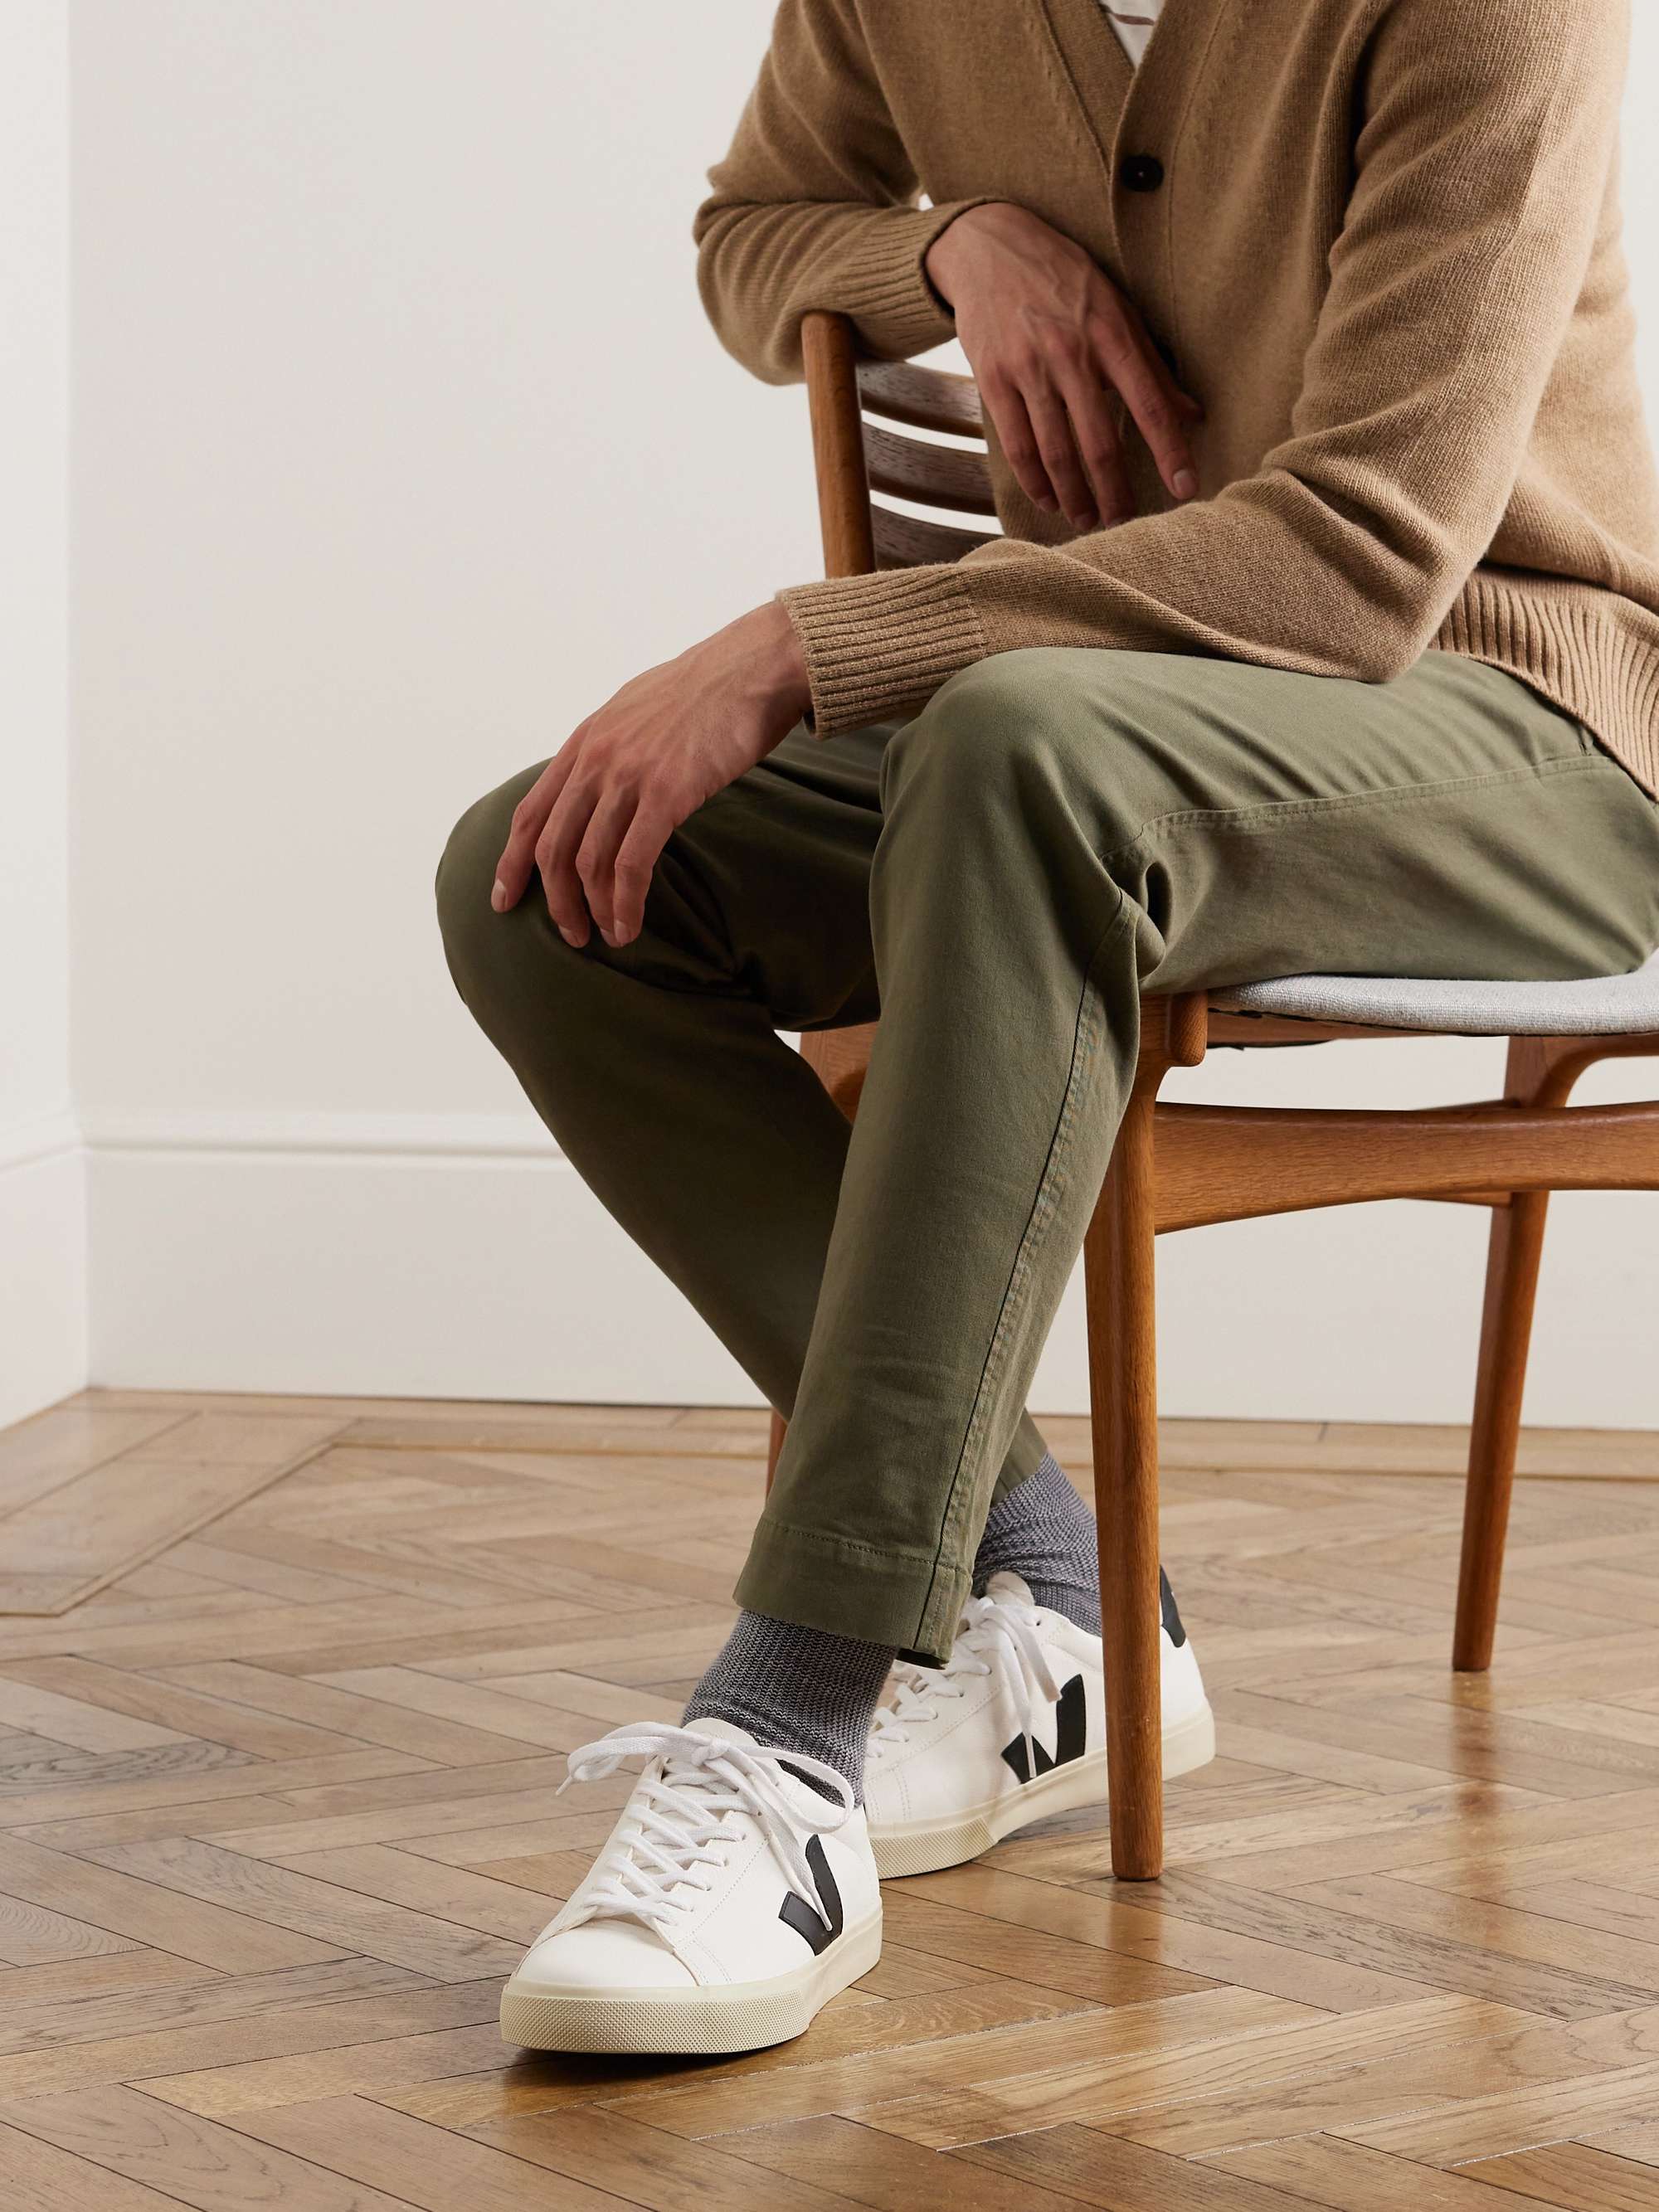 VEJA Campo Rubber-Trimmed Leather Sneakers